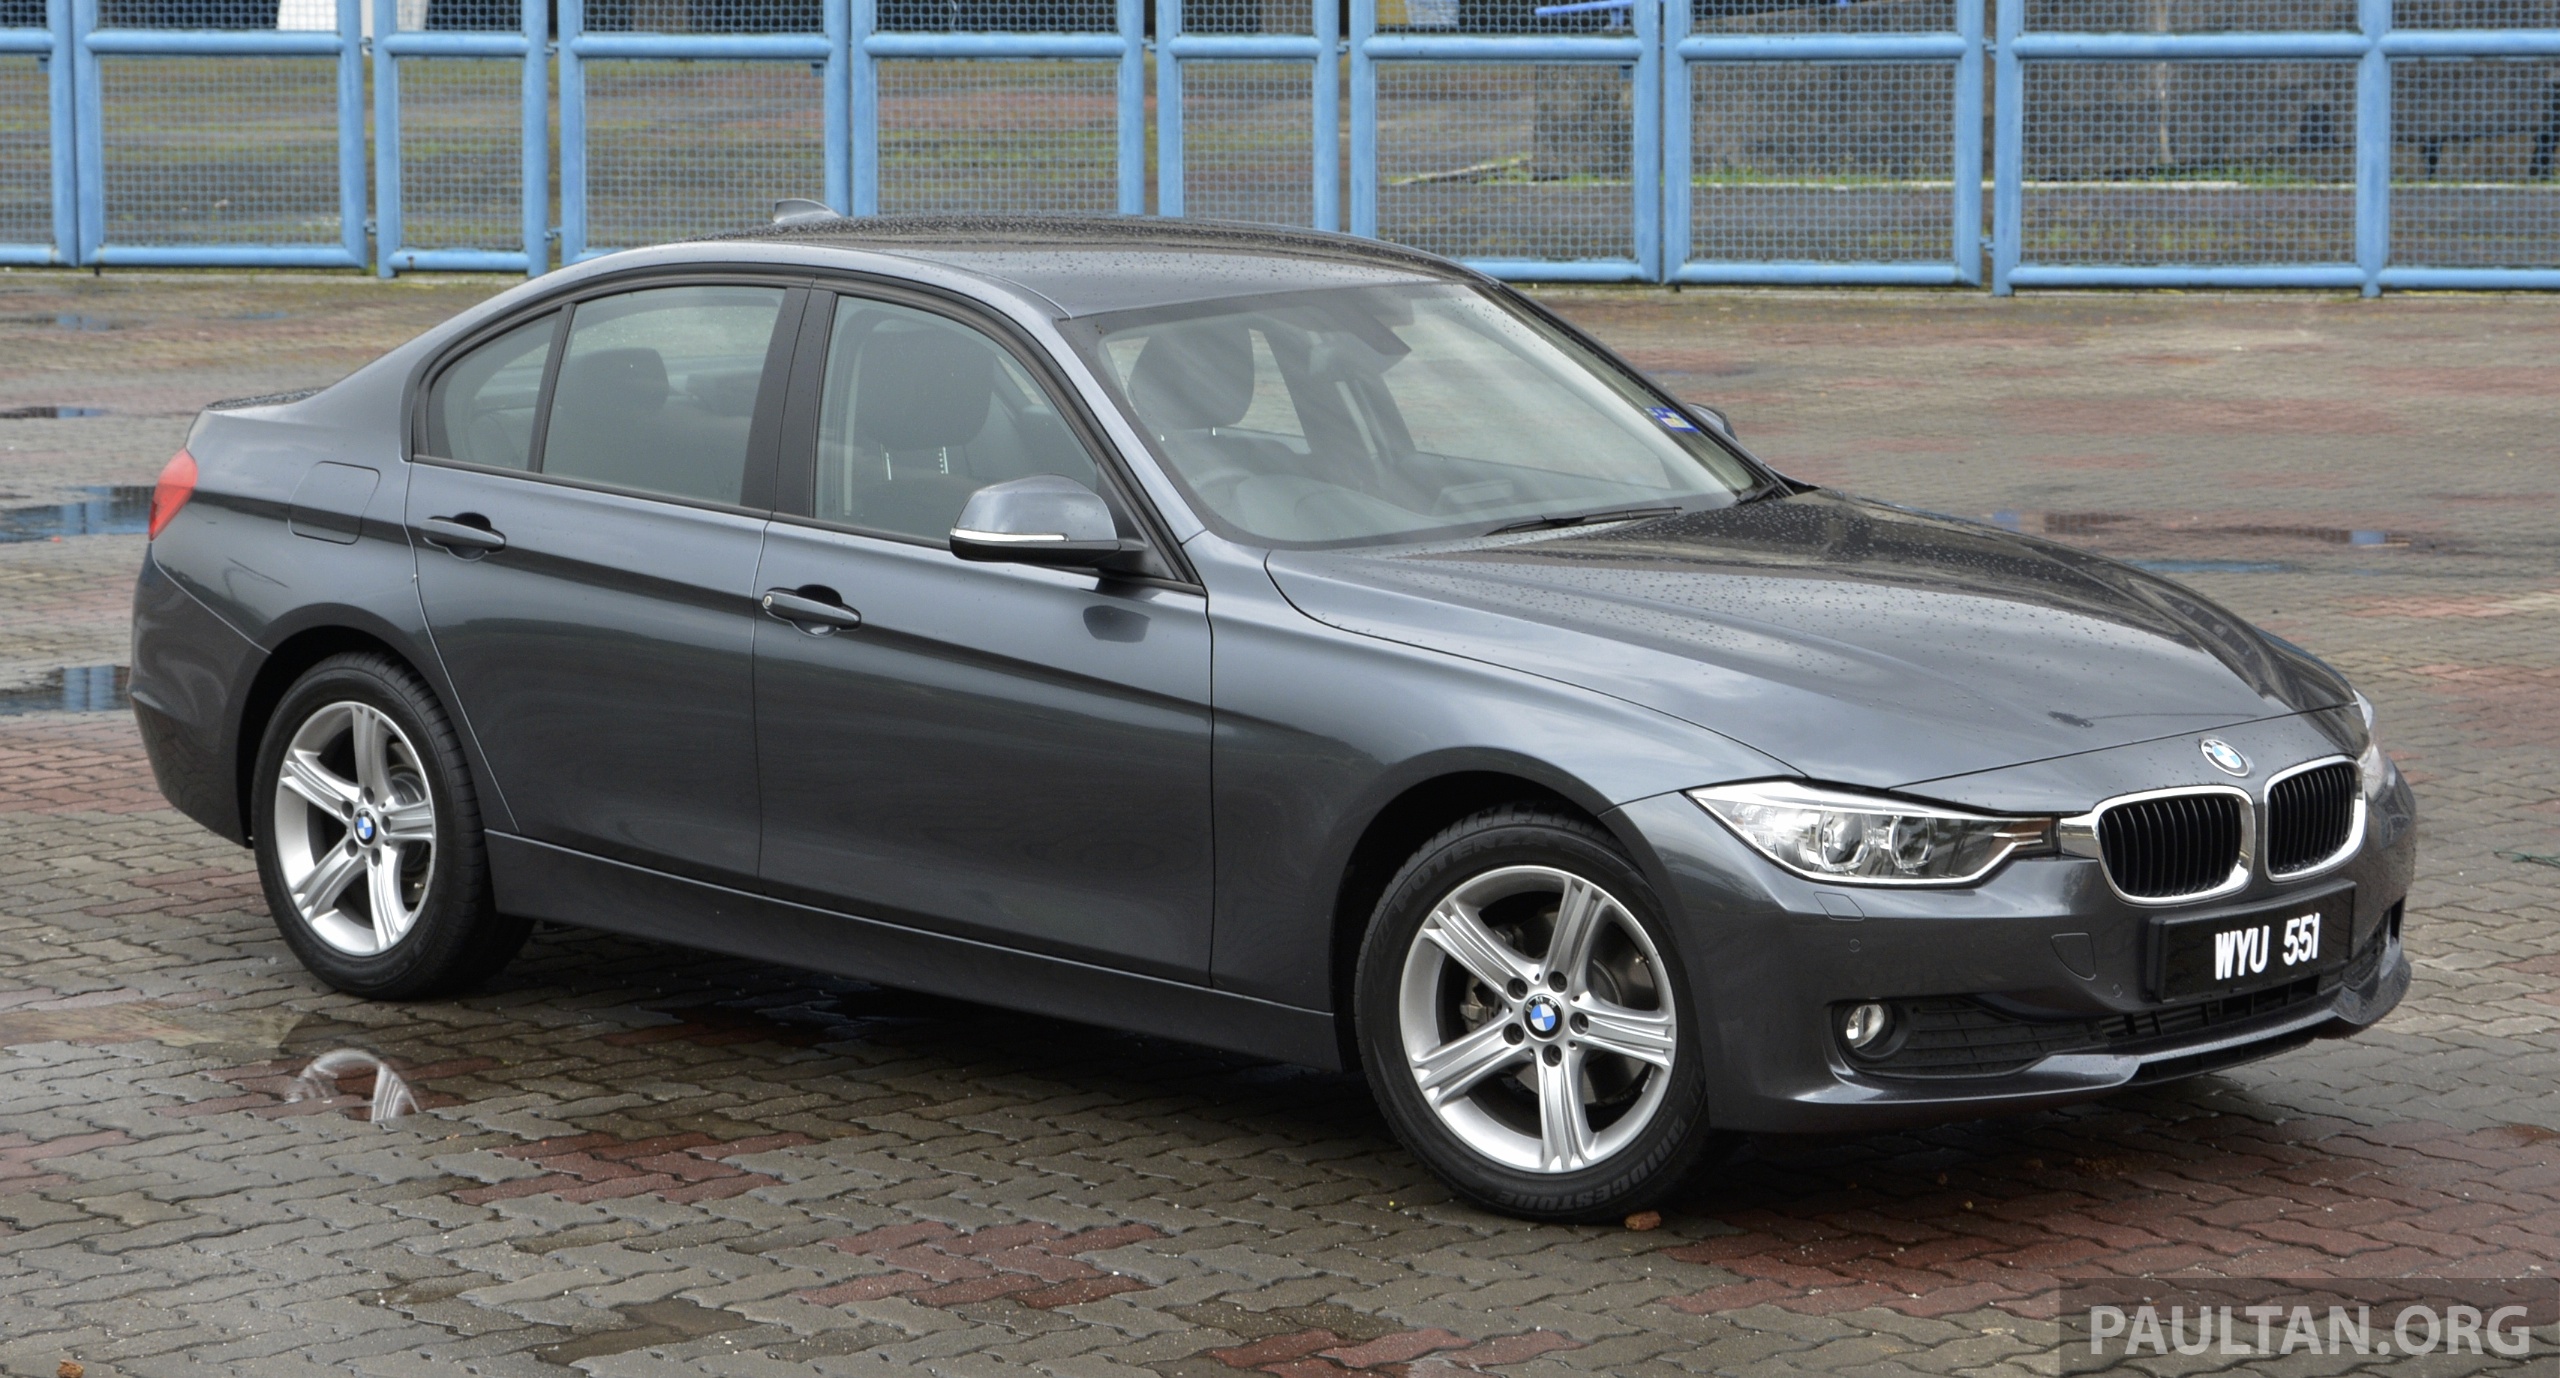 The new bmw 316i 2013 #4